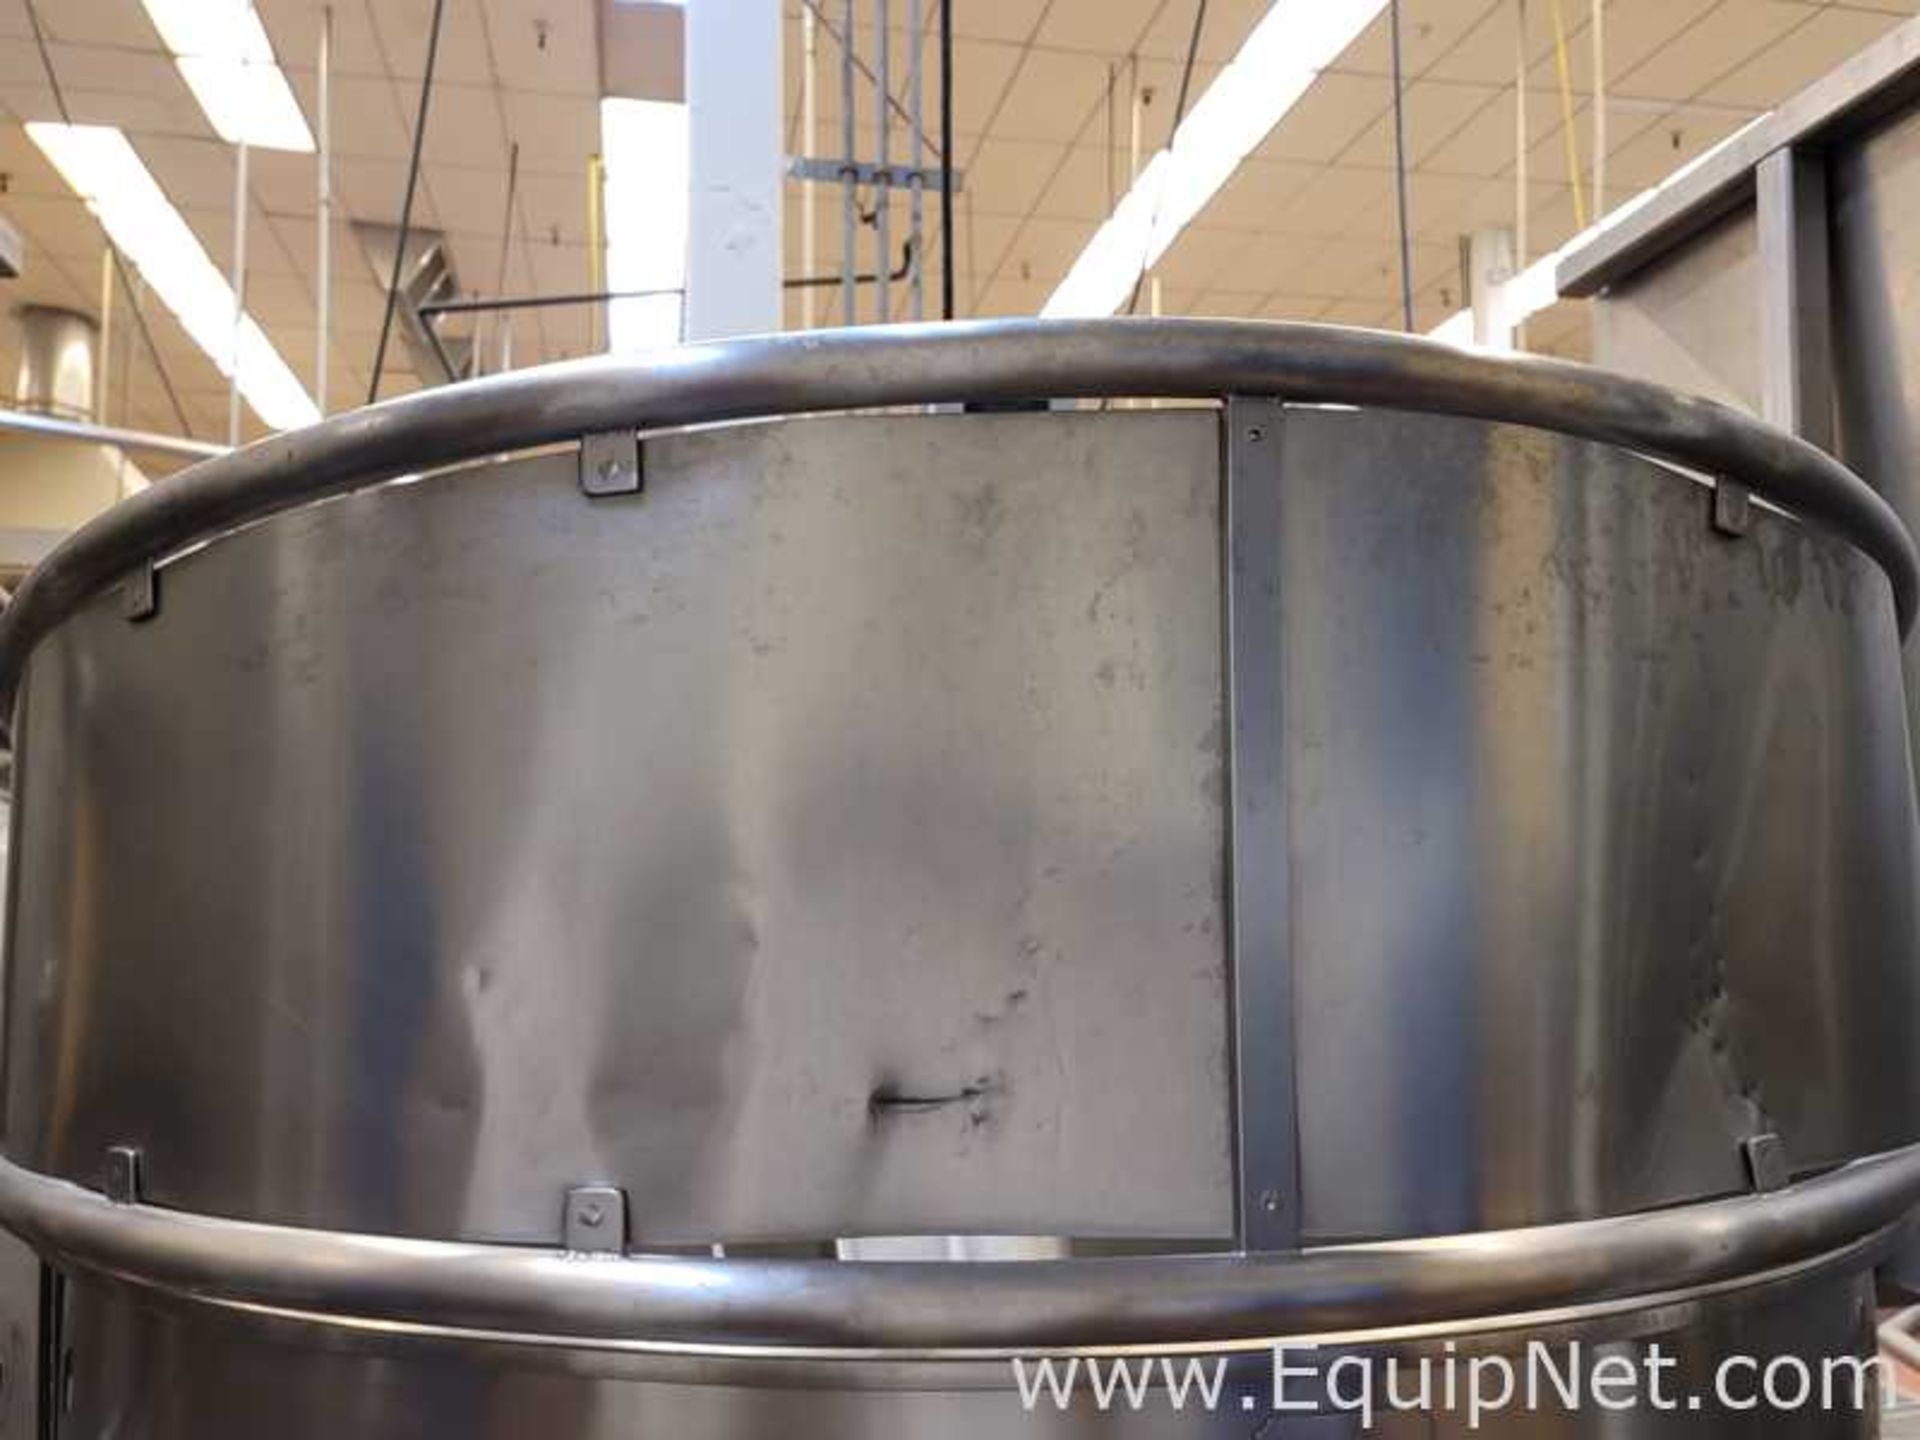 DESCRIPTION: Lee Industries 120 Gallon Stainless Steel Jacketed Kettle with Side Mount AgitationSide - Image 8 of 14